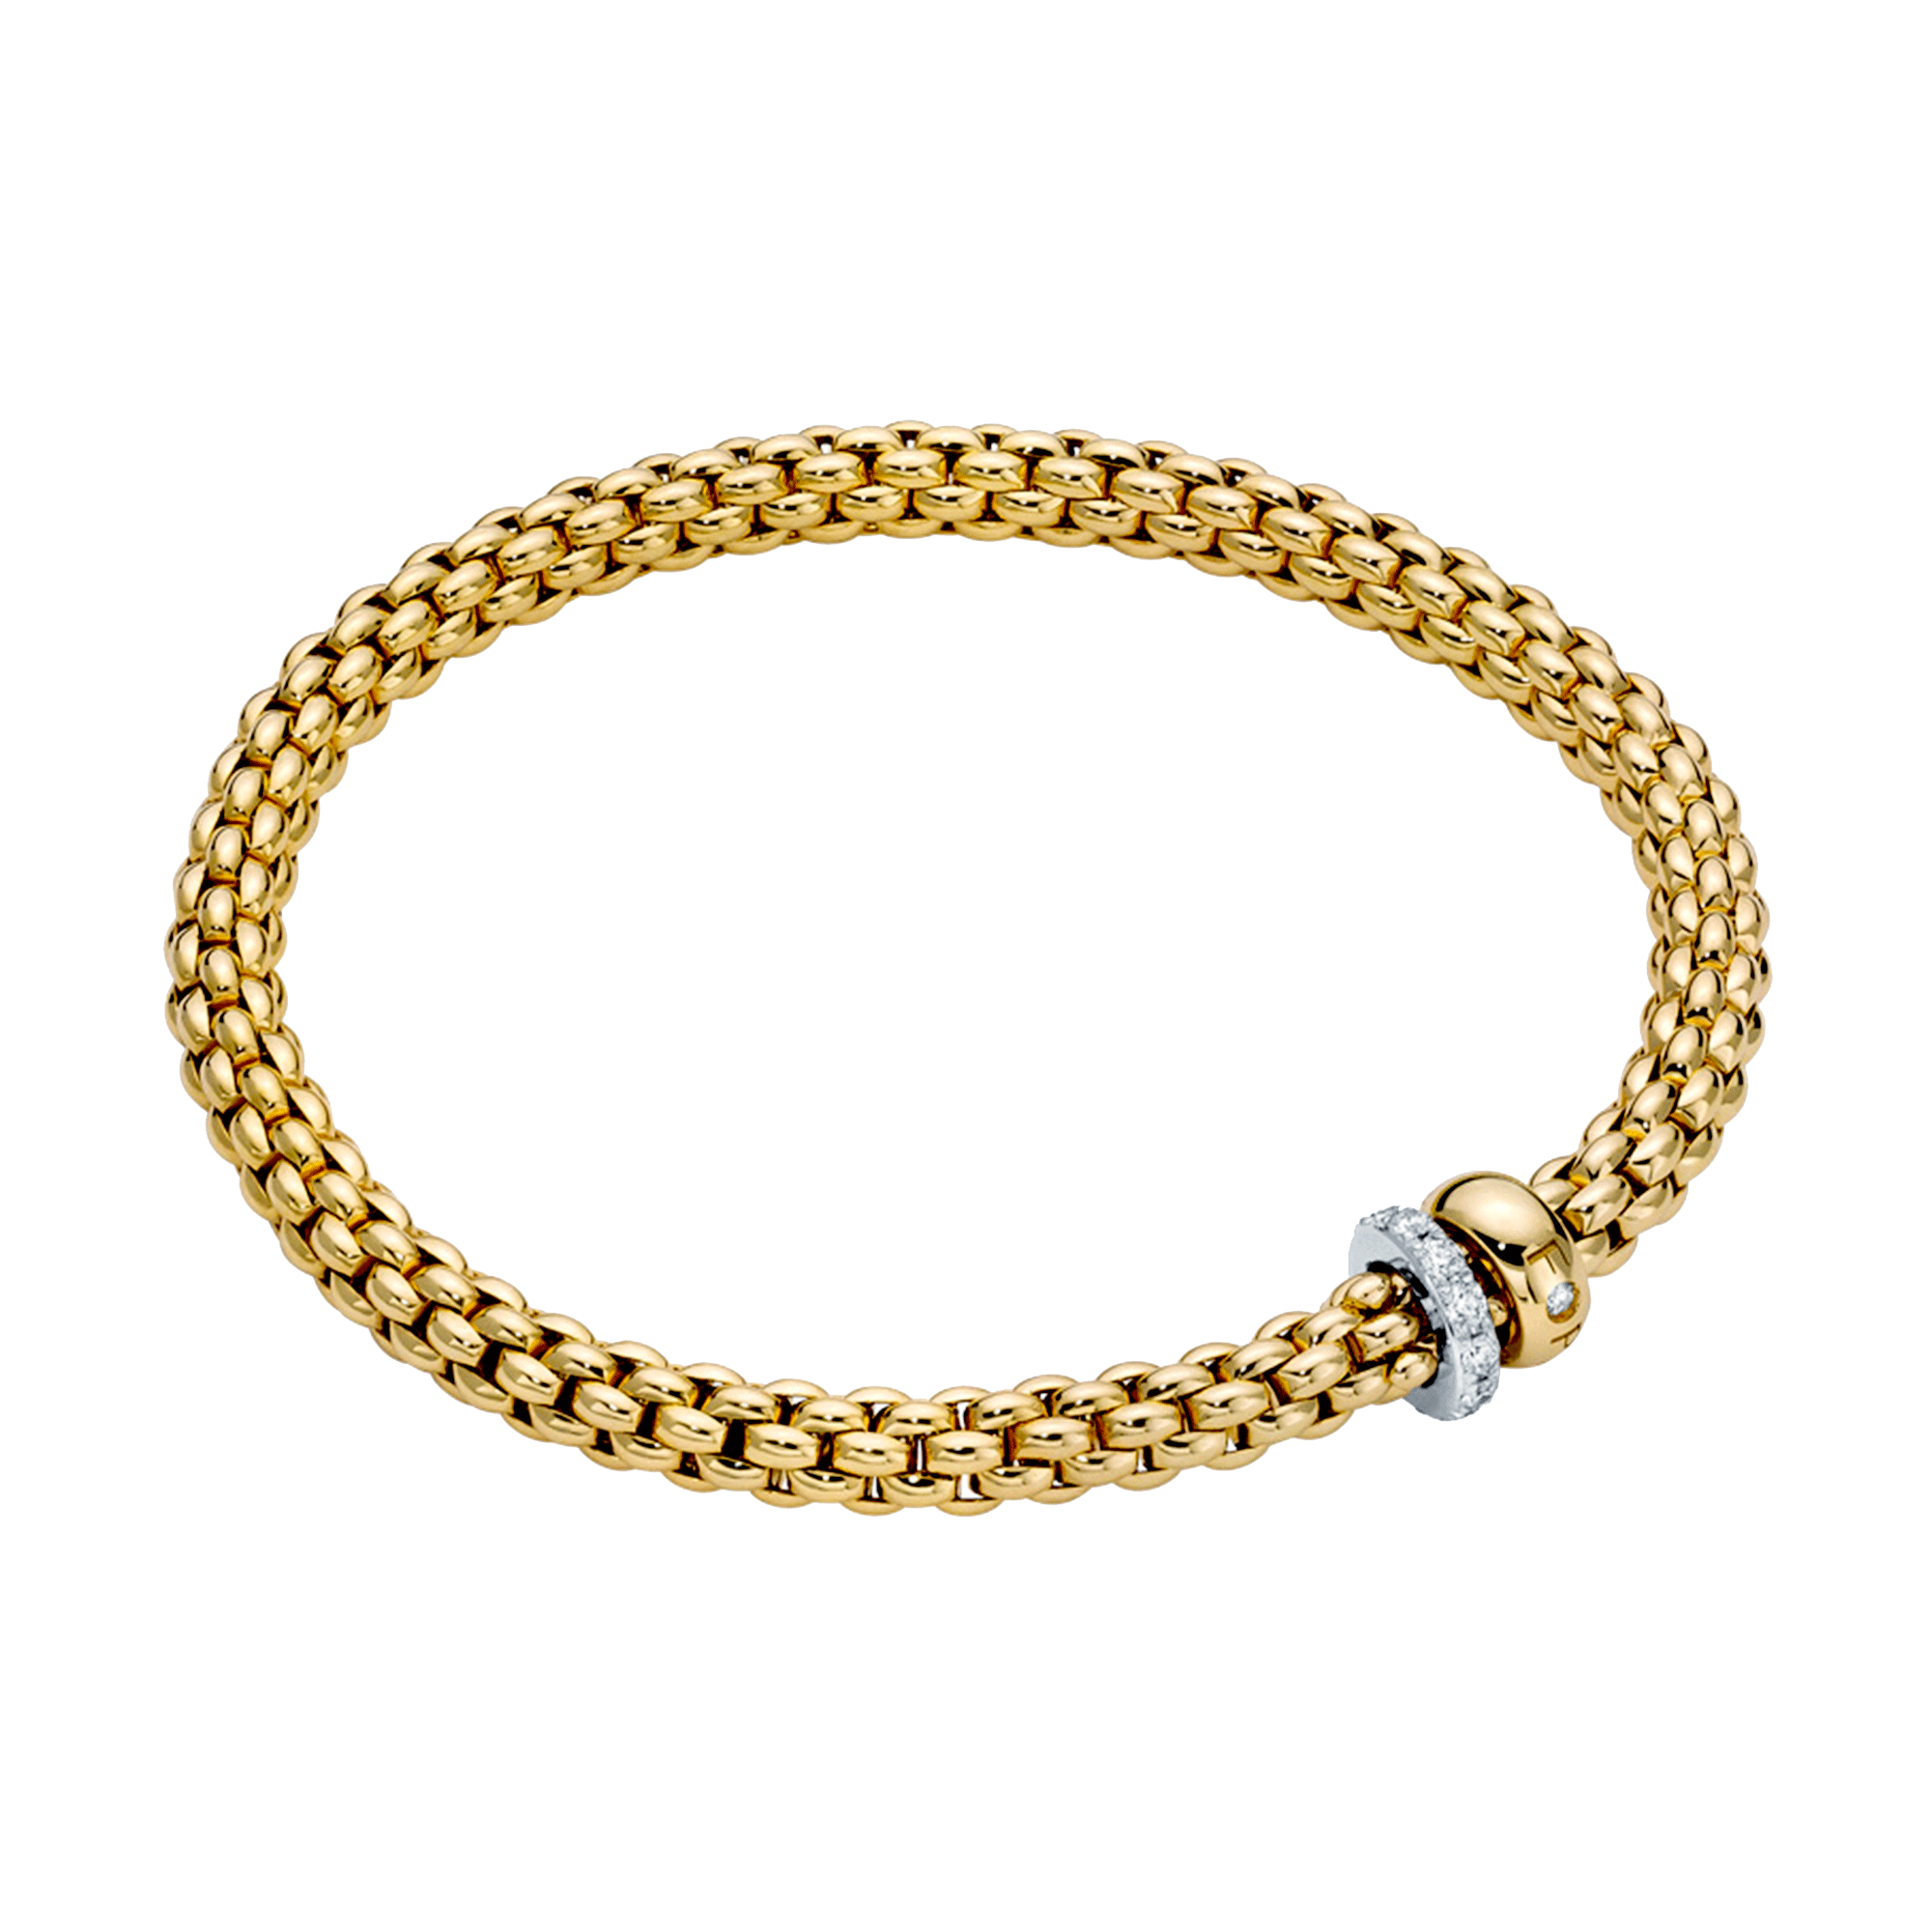 Solo 18ct Yellow Gold Bracelet With Pave Diamond Set And Polished Rondels